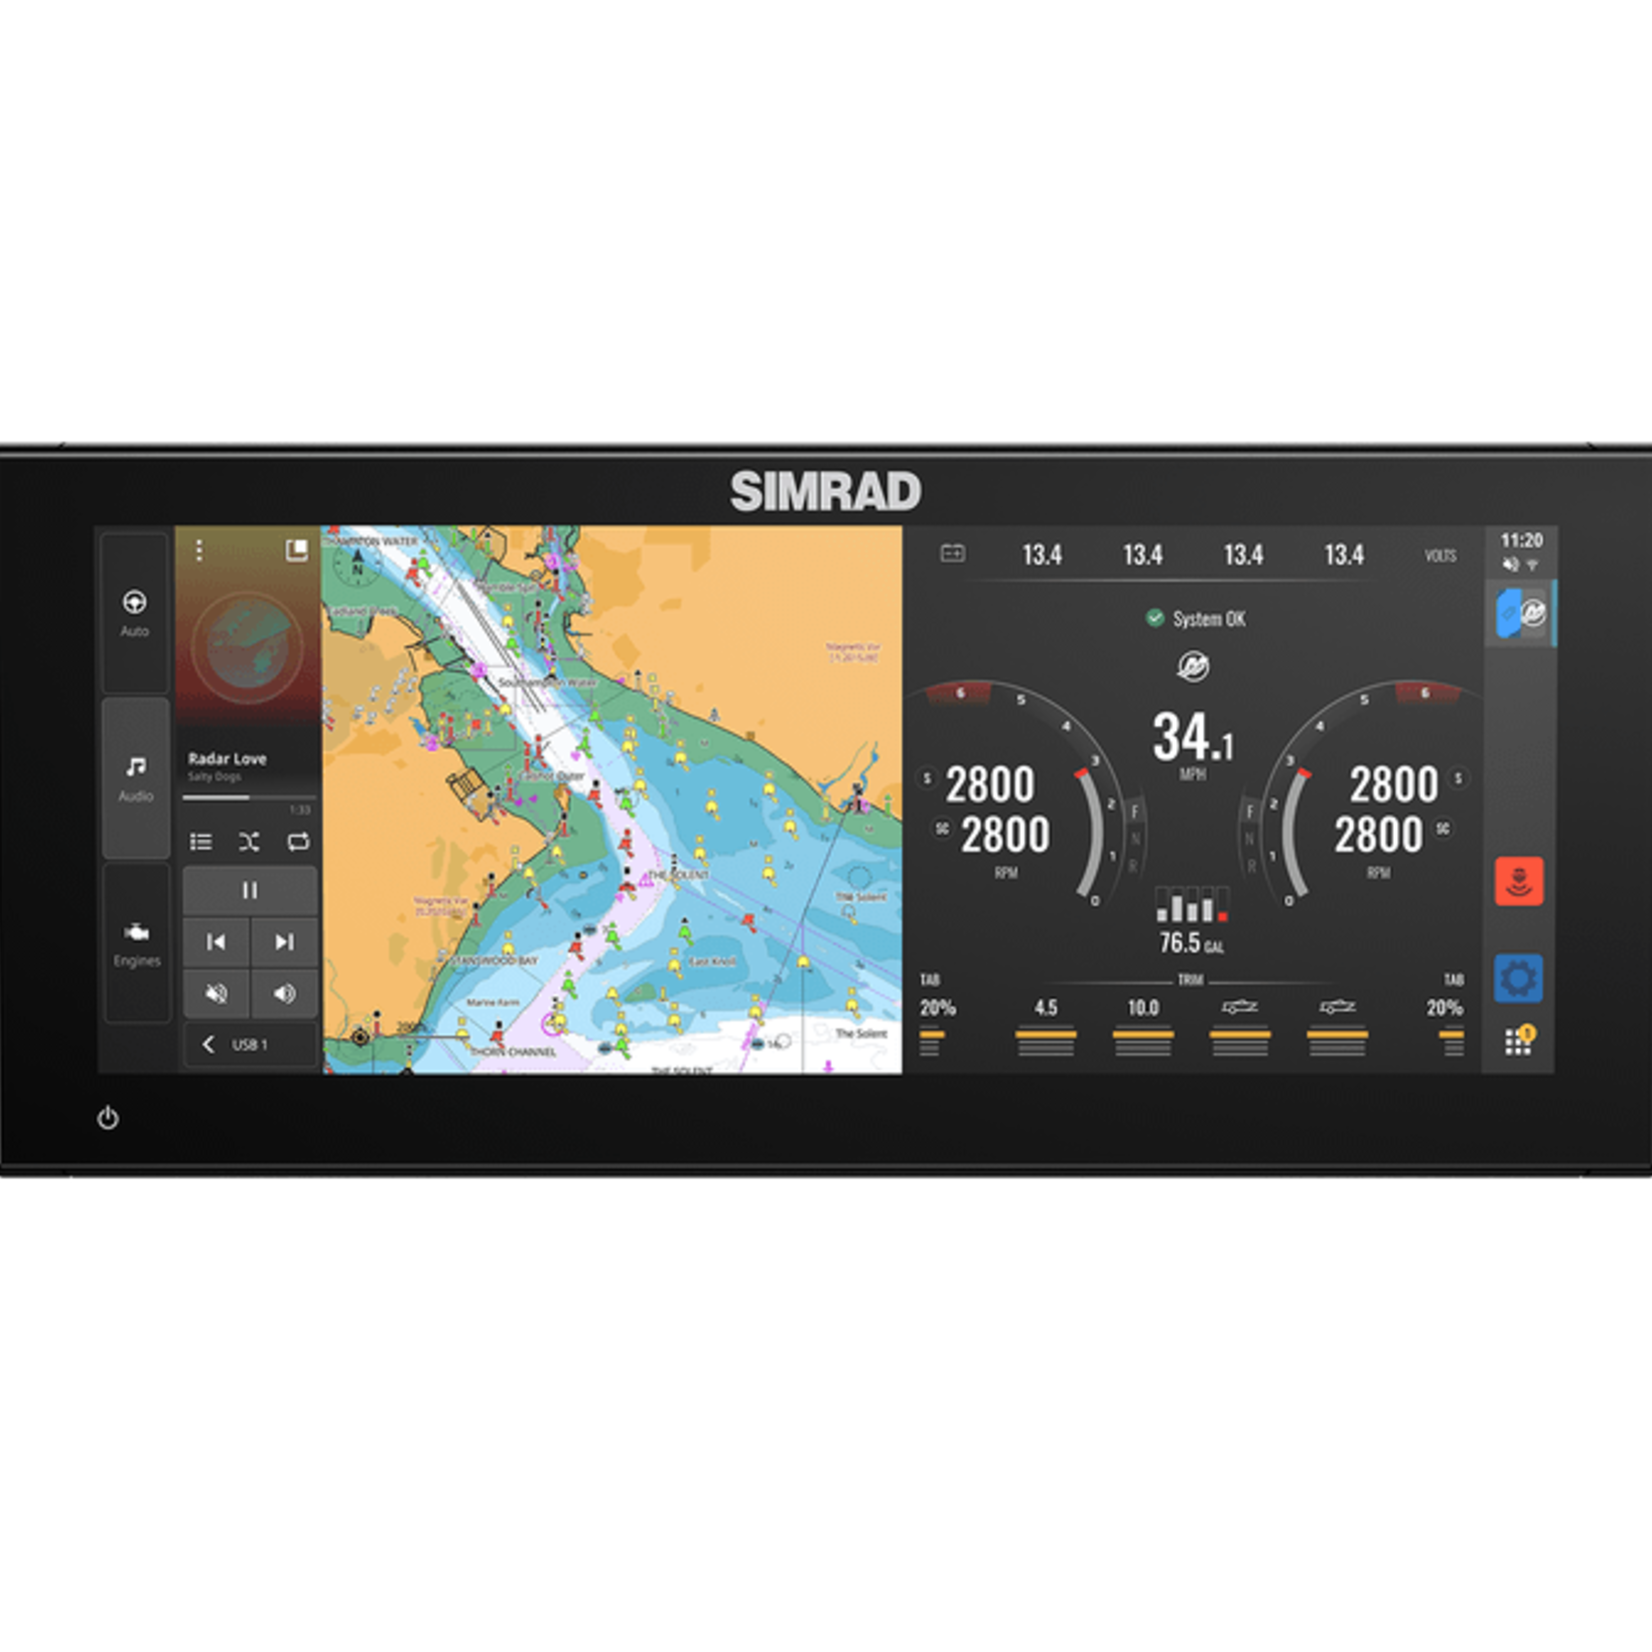 Simrad NSX® ULTRAWIDE offers a new perspective on boating. Discover an all-new aspect ratio for our most immersive experience yet.